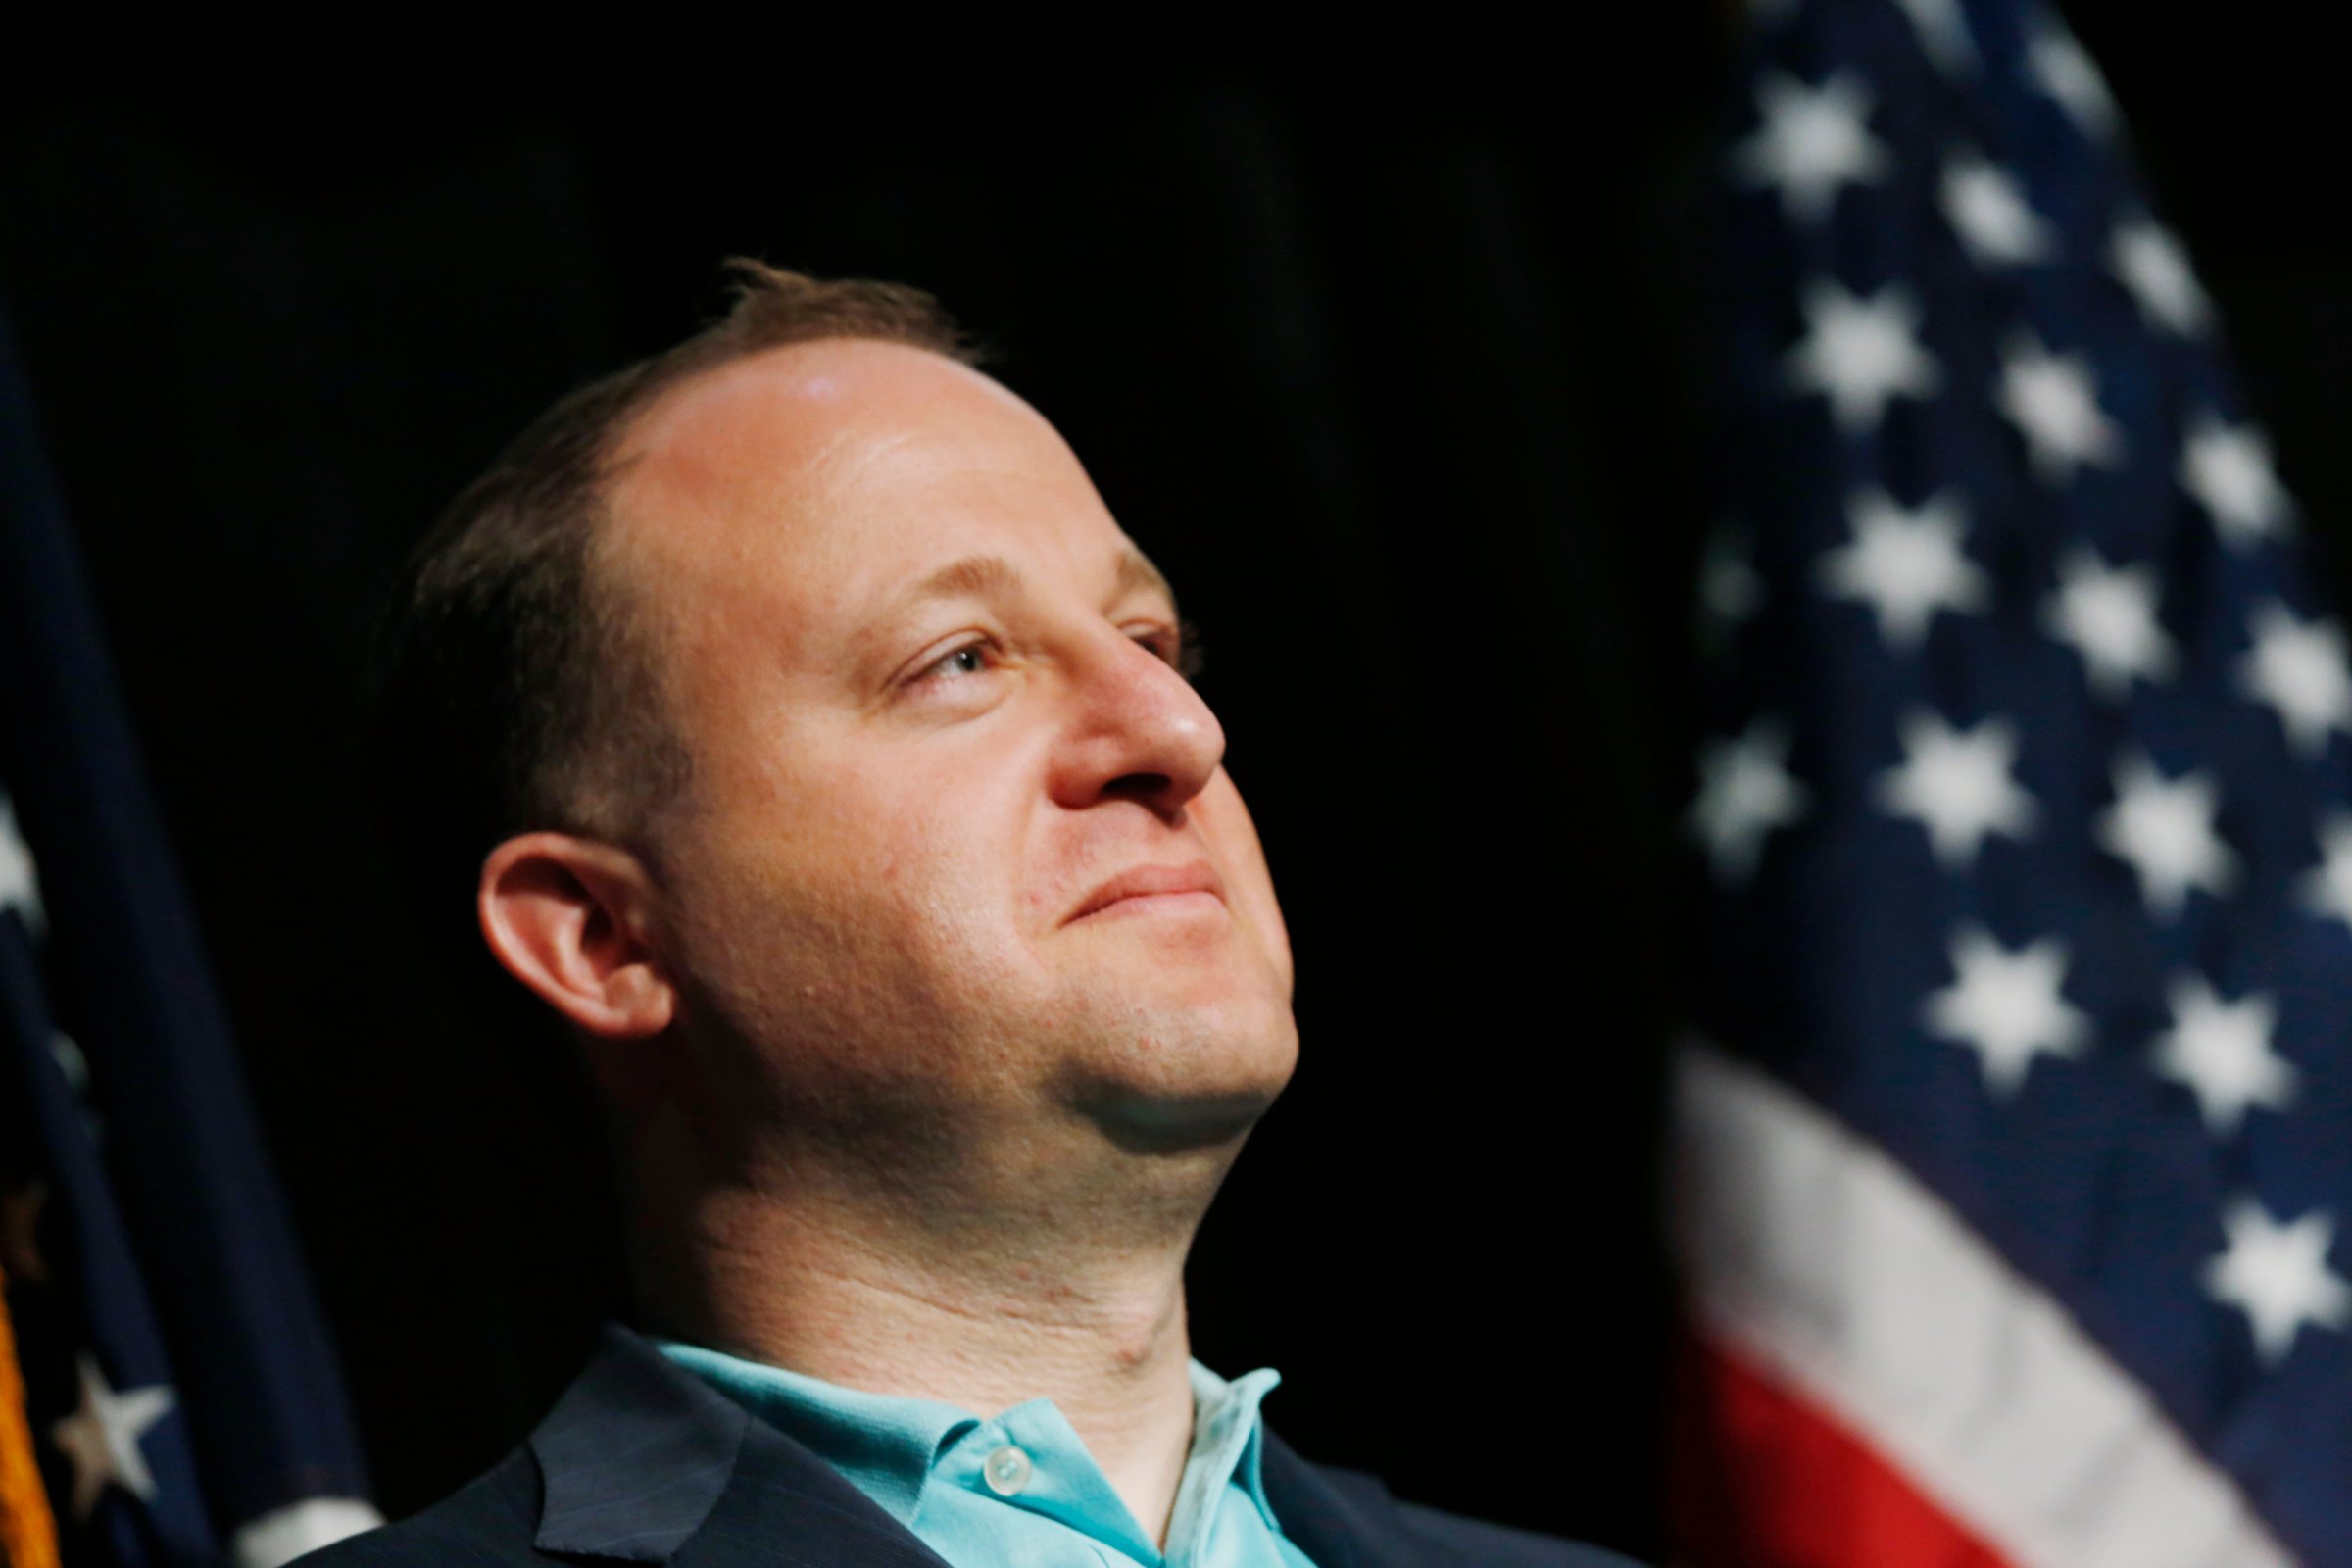 U.S. Representative Jared Polis during the Colorado Democratic Party's State Assembly in Denver on April 12, 2014.